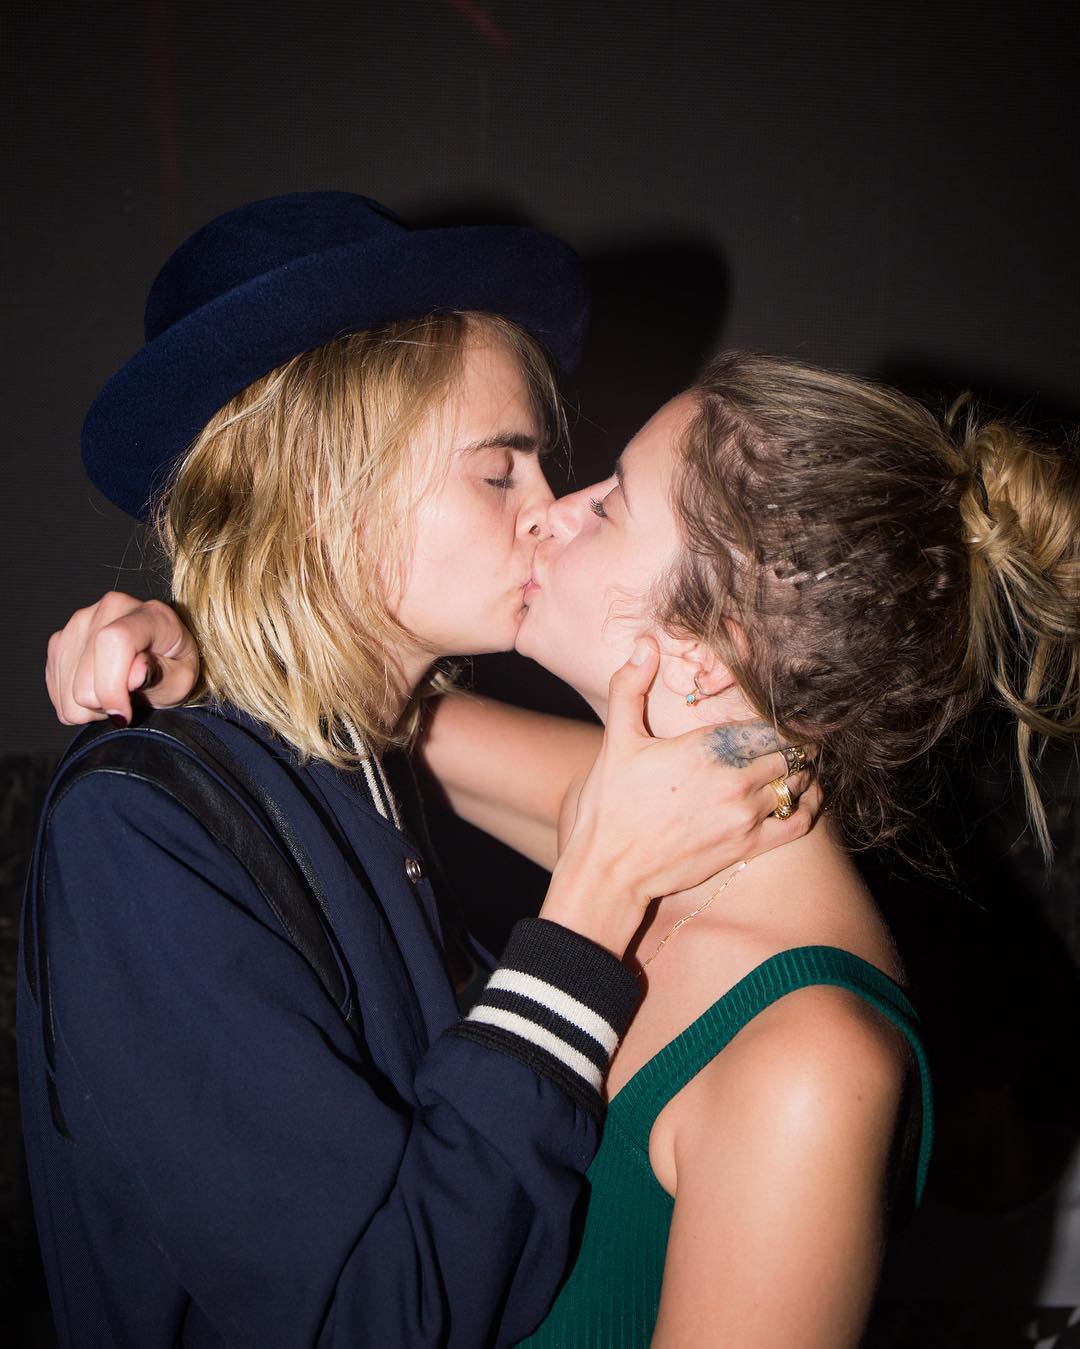 Why the Internet Thinks Cara Delevingne and Ashley Benson Are Engaged